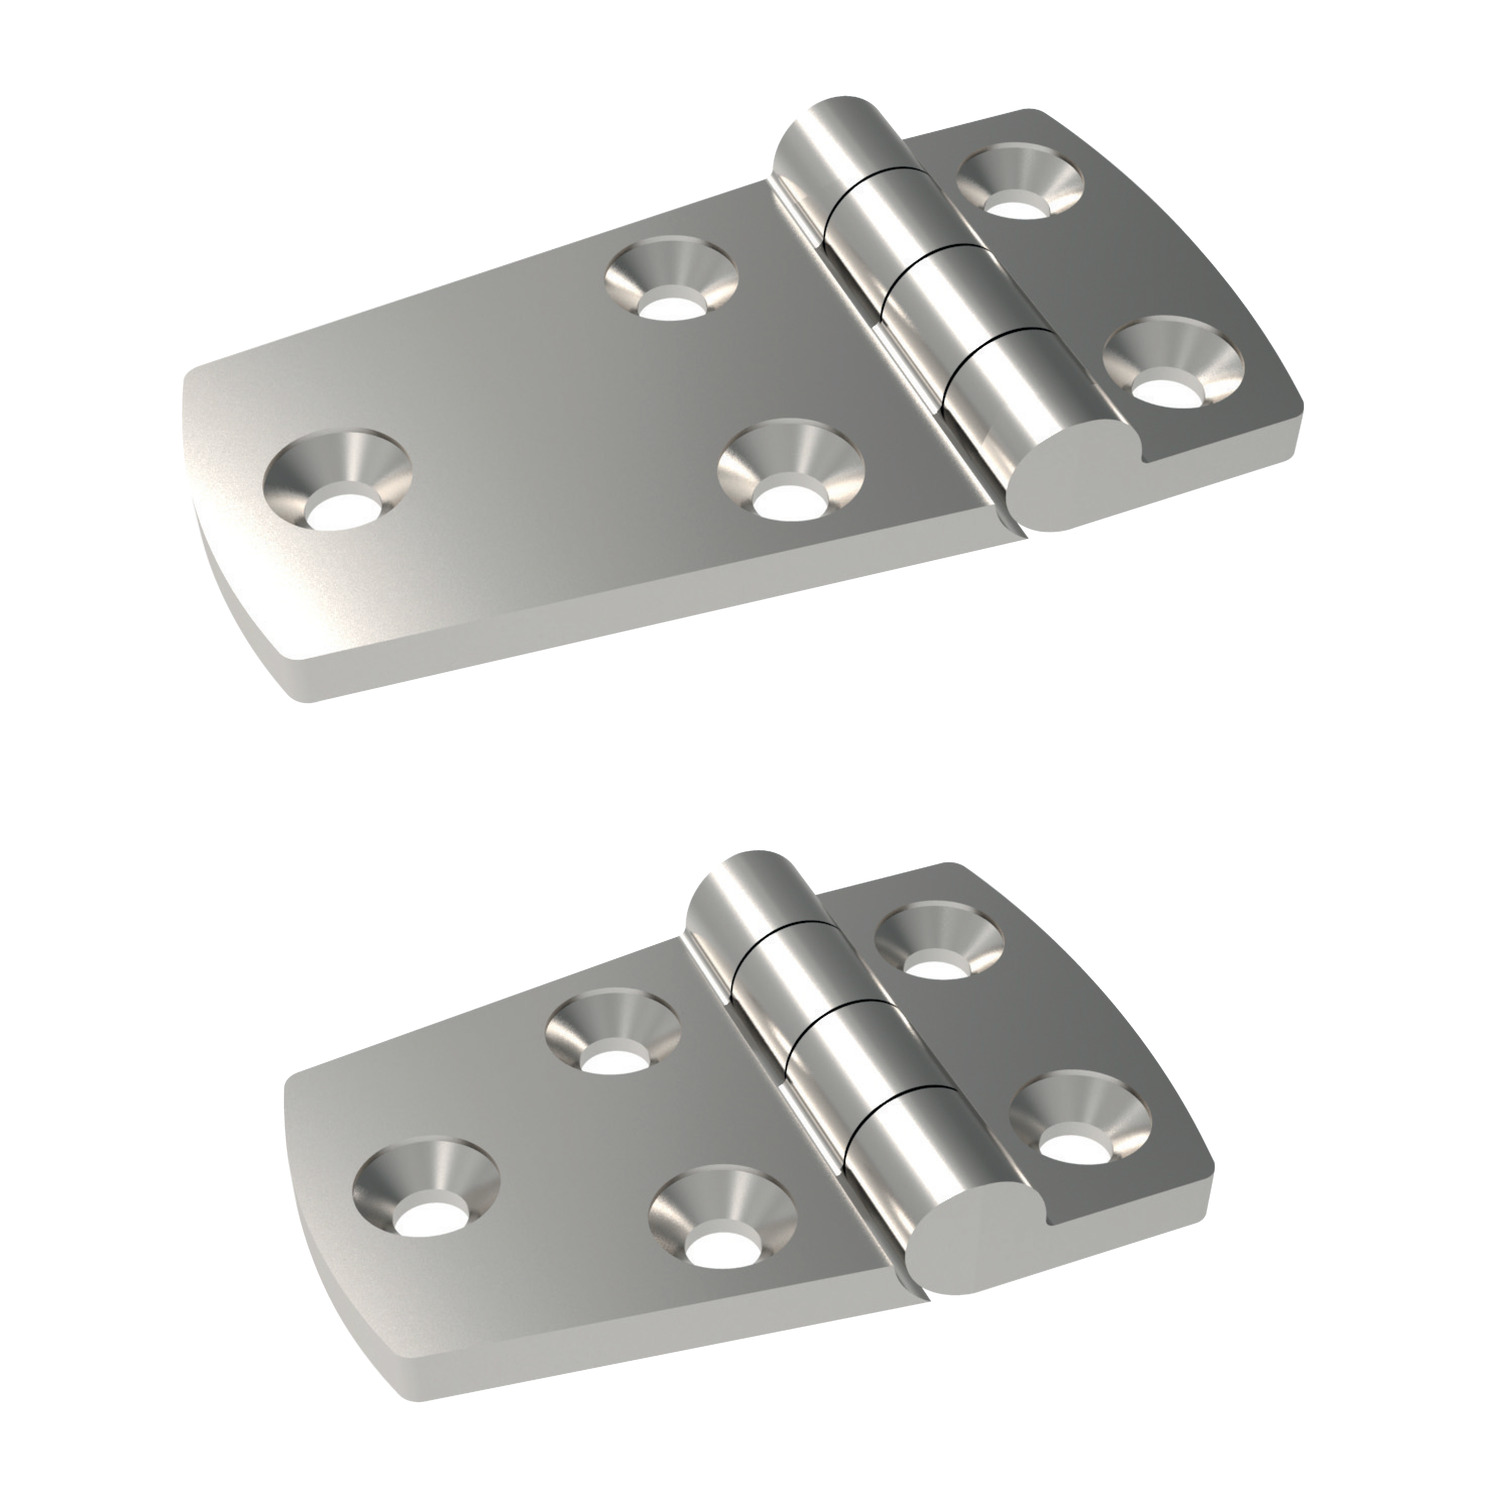 S0460.AC0005 Surface Mount - Leaf Hinges Screw mount - Stainless steel. 58 x 38